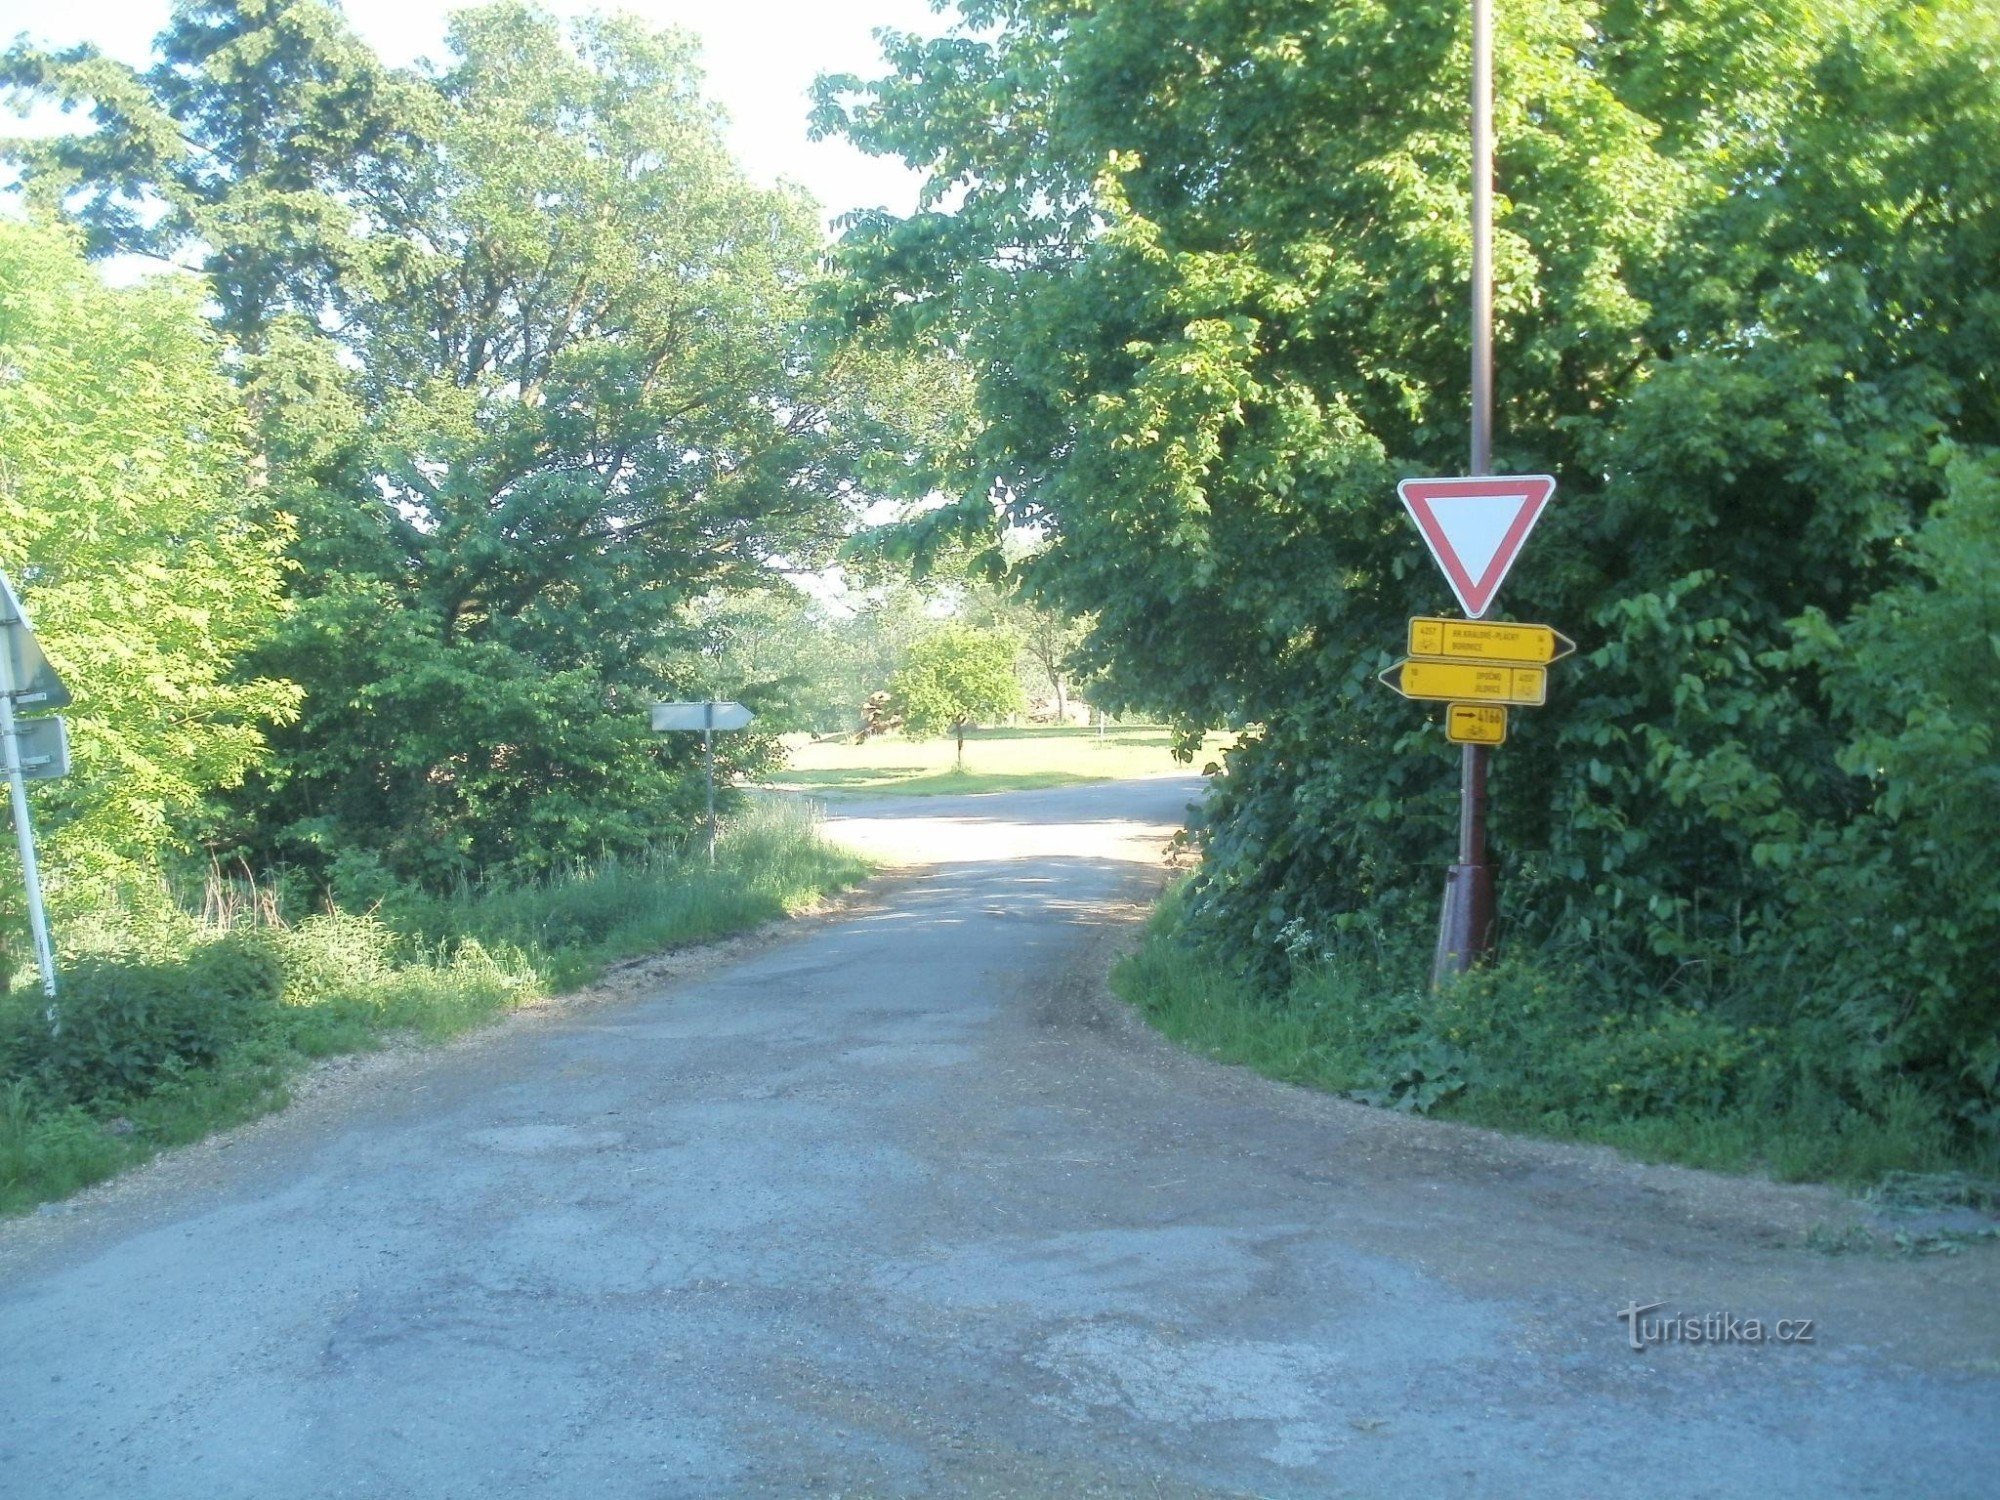 cyclotourist crossroad - Libníkovice, near the lookout tower